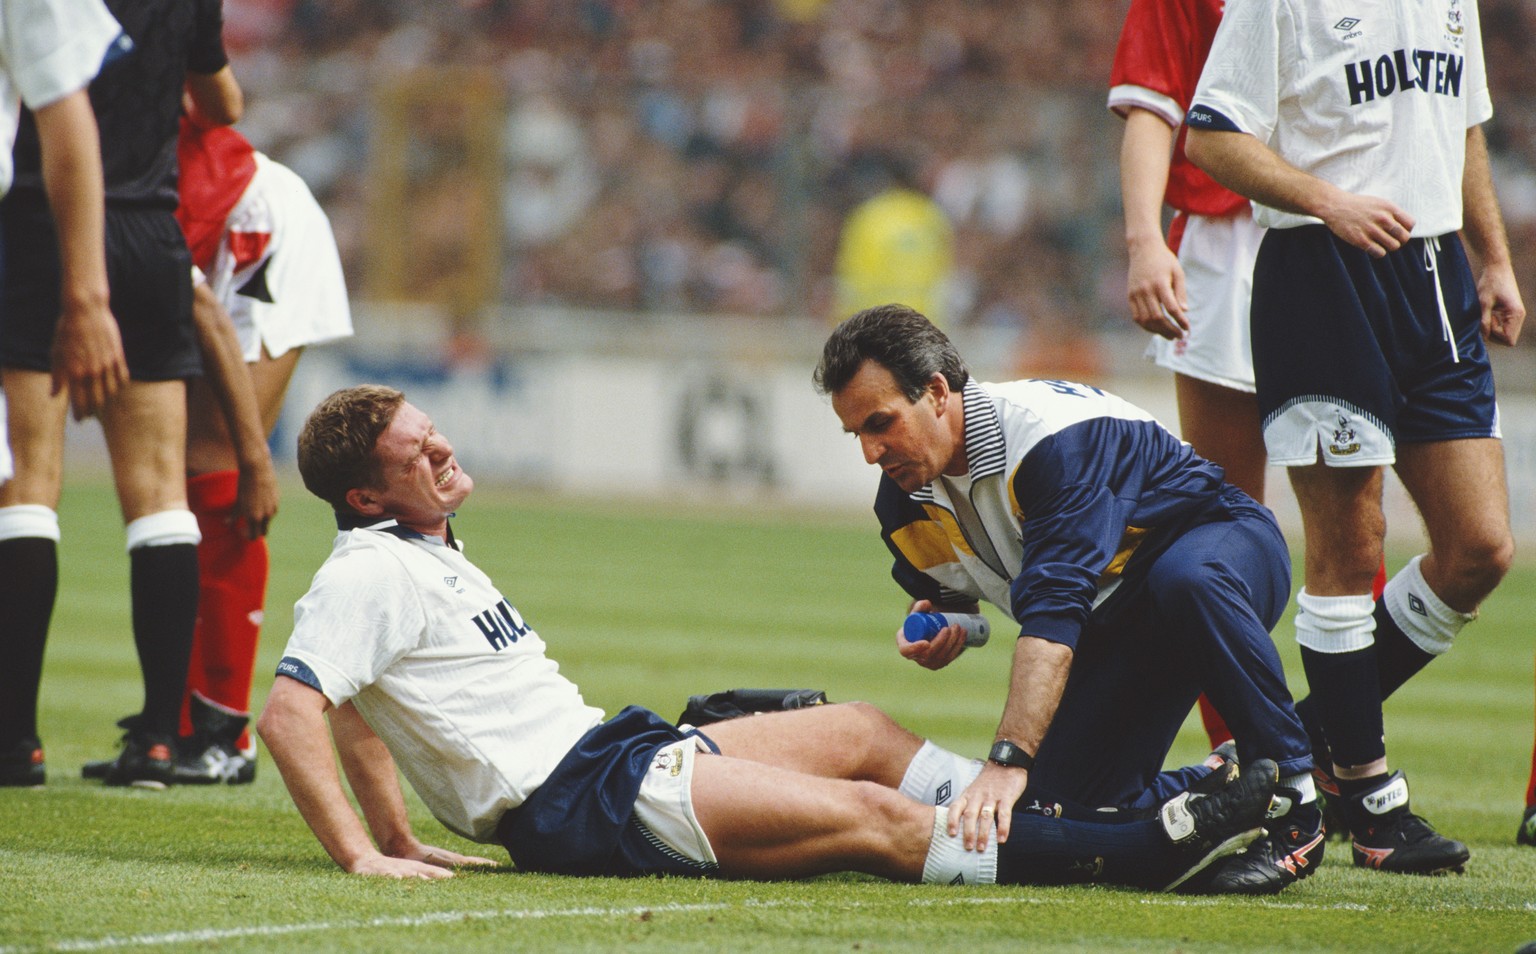 LONDON, UNITED KINGDOM - MAY 18: Tottenham Hotspur player Paul Gascoigne receives treatment before being stretchered off after commiting a foul on Nottingham Forest player Gary Charles during the FA C ...